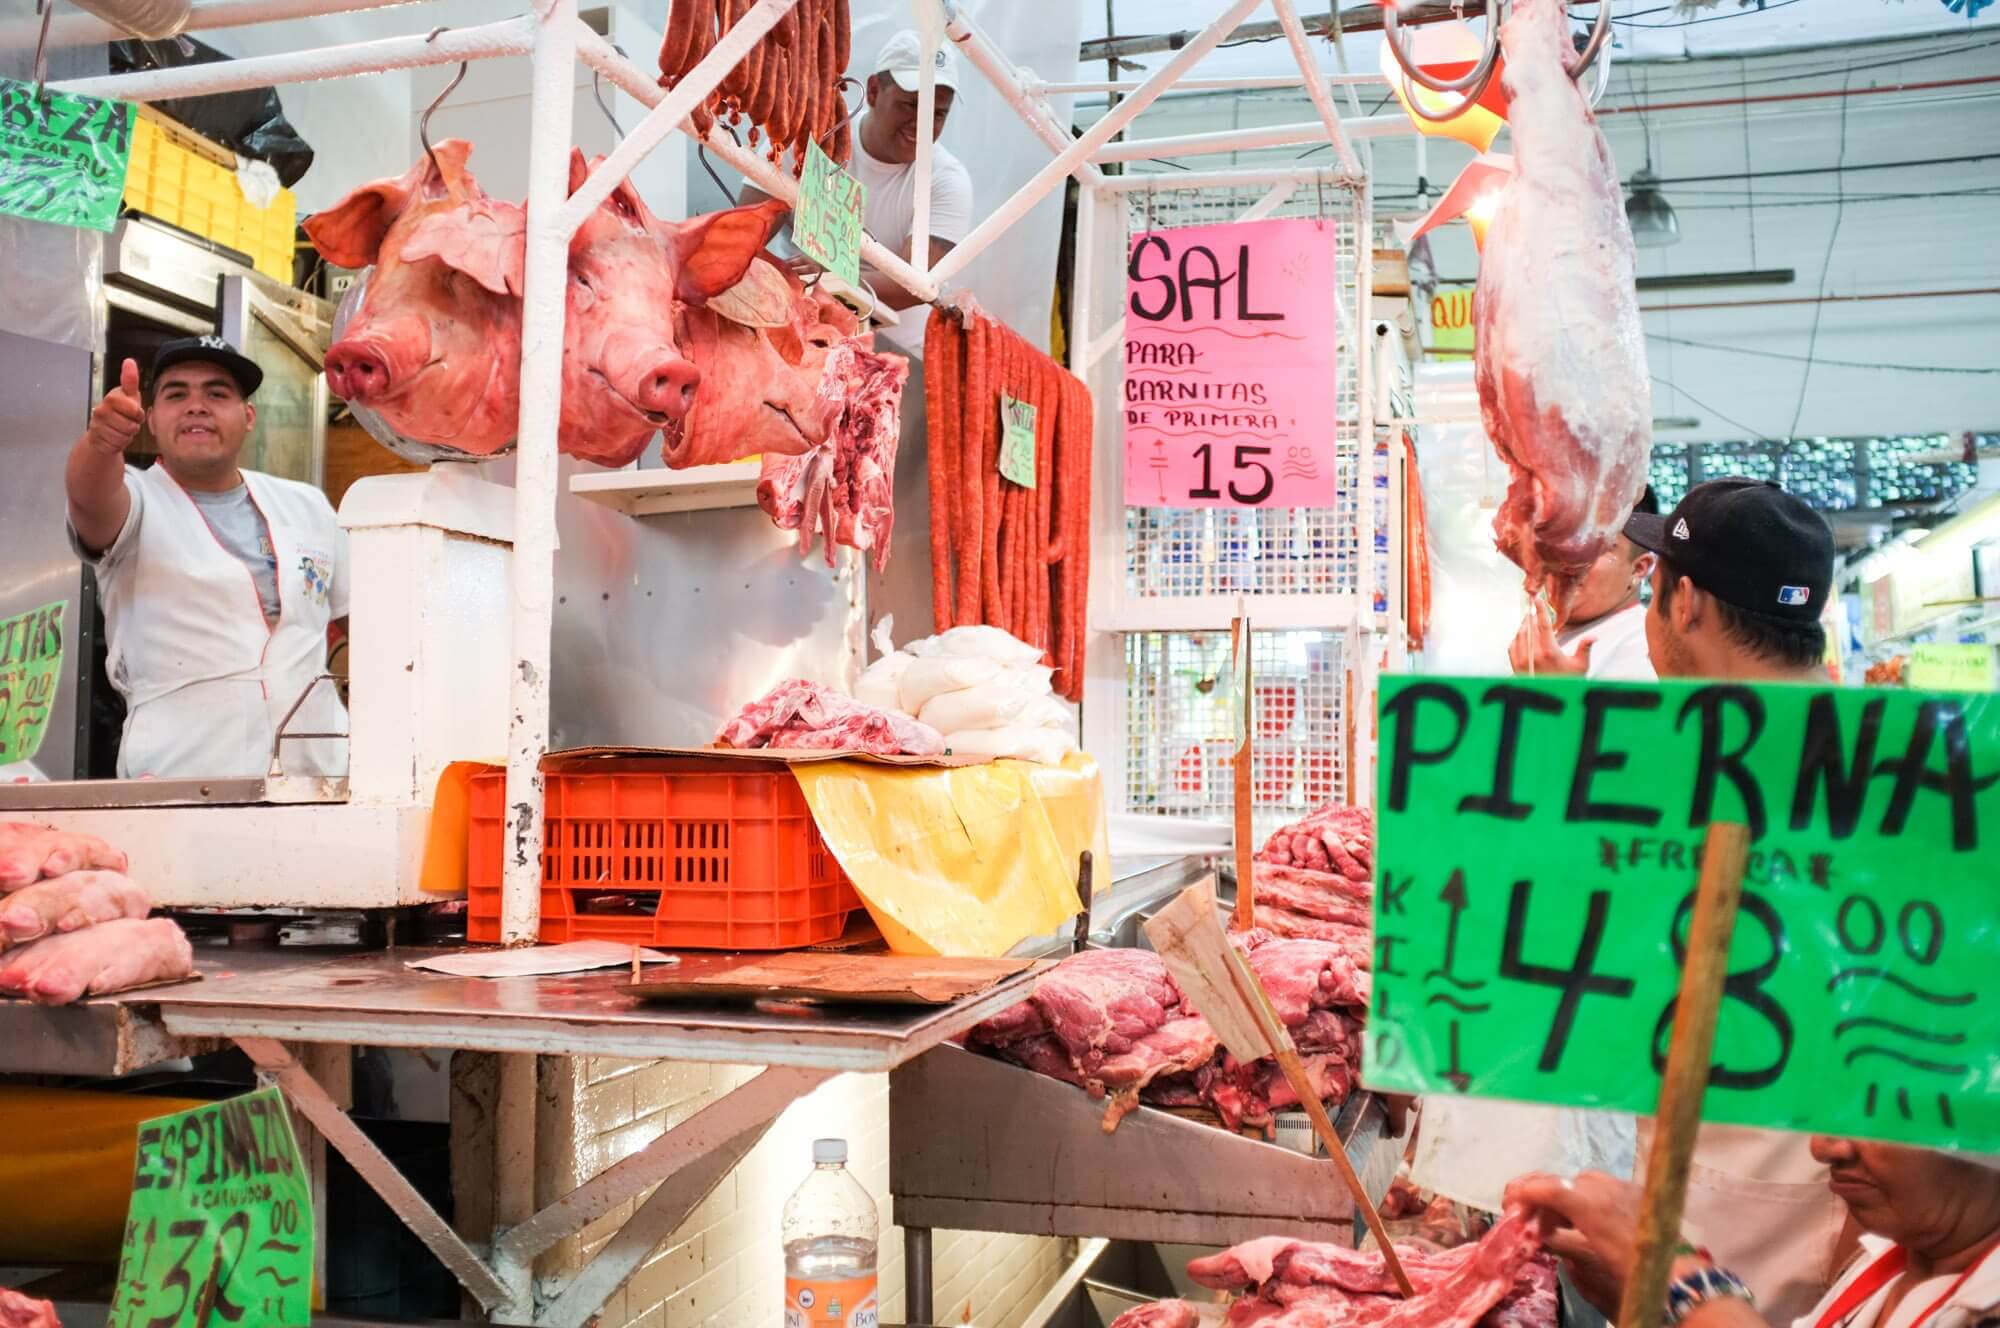 Pig heads and other meats at La Merced